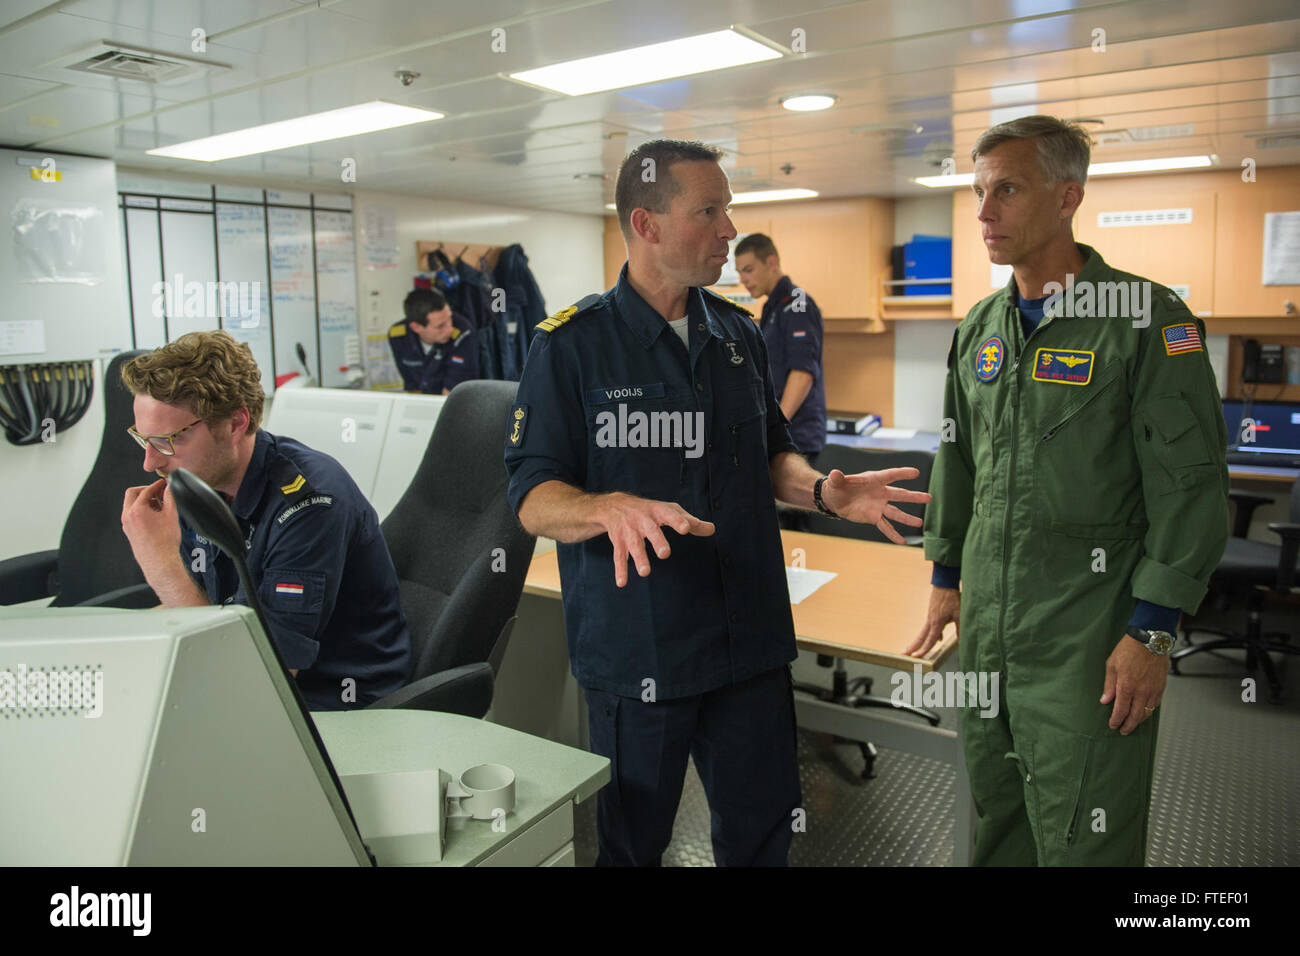 140612-N-EZ054-150 BALTIC SEA (June 12, 2014) -  Royal Netherlands Navy Kapitein-luitenant-ter-Zee Wiggert Vooijs speaks with Rear Adm. Rick Snyder, commander task force 162, about the ongoing operations on the HNLMS Friesland during Baltic Operations (BALTOPS) 2014. Now in its 42nd year, BALTOPS is an annual, multinational exercise to enhance maritime capabilities and interoperability, and to support regional stability. (U.S. Navy photo by Mass Communication Specialist 3rd Class Luis R. Chavez Jr/Released) Stock Photo